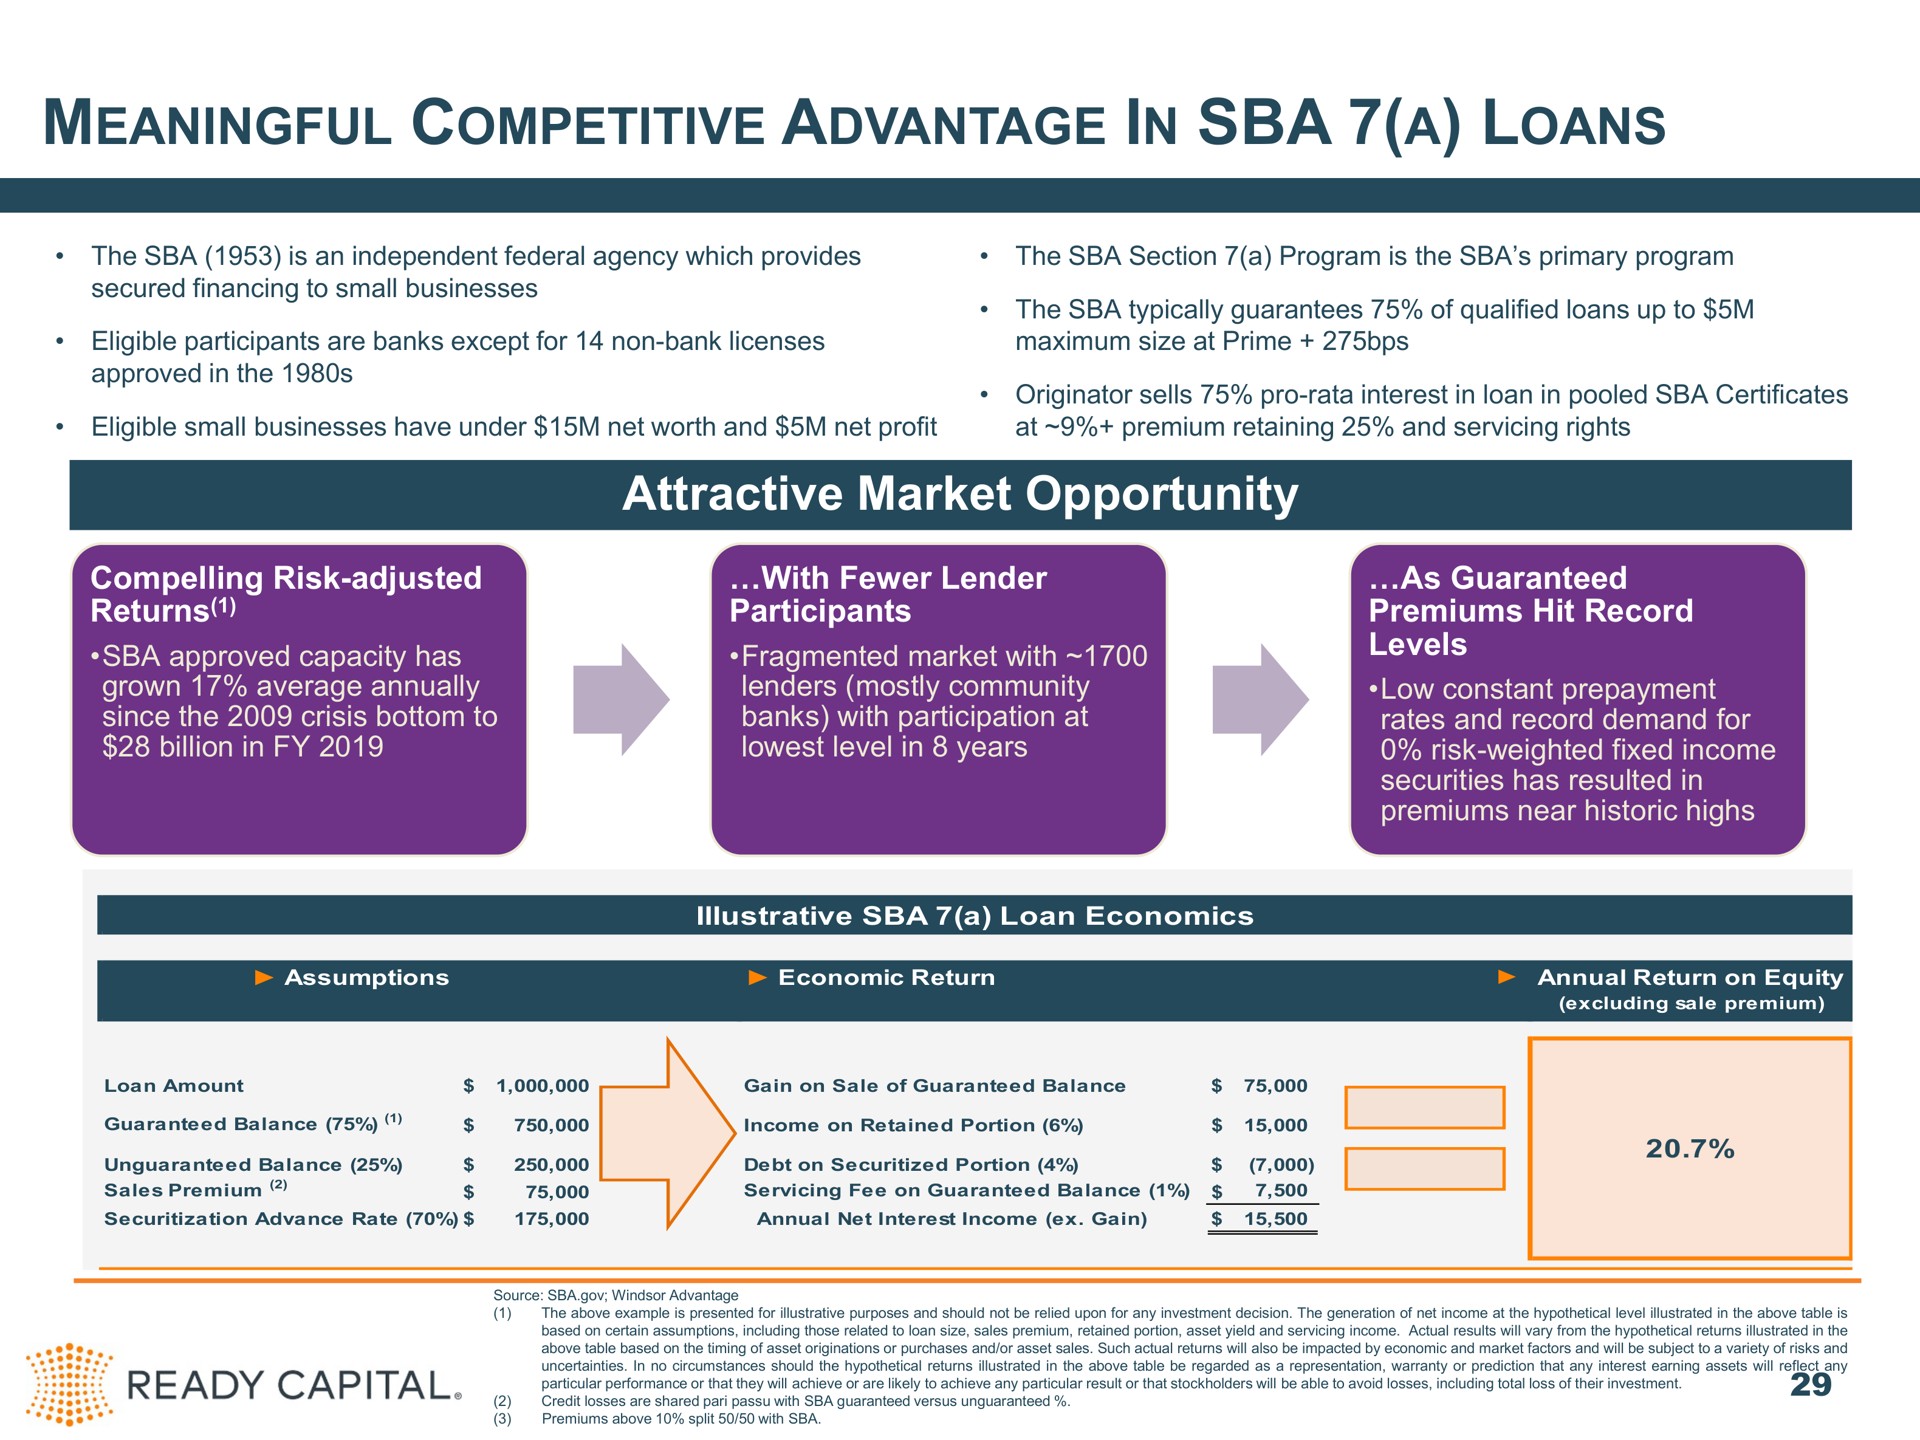 meaningful competitive advantage in a loans attractive market opportunity compelling risk adjusted returns with lender participants as guaranteed premiums hit record levels ready capital | Ready Capital